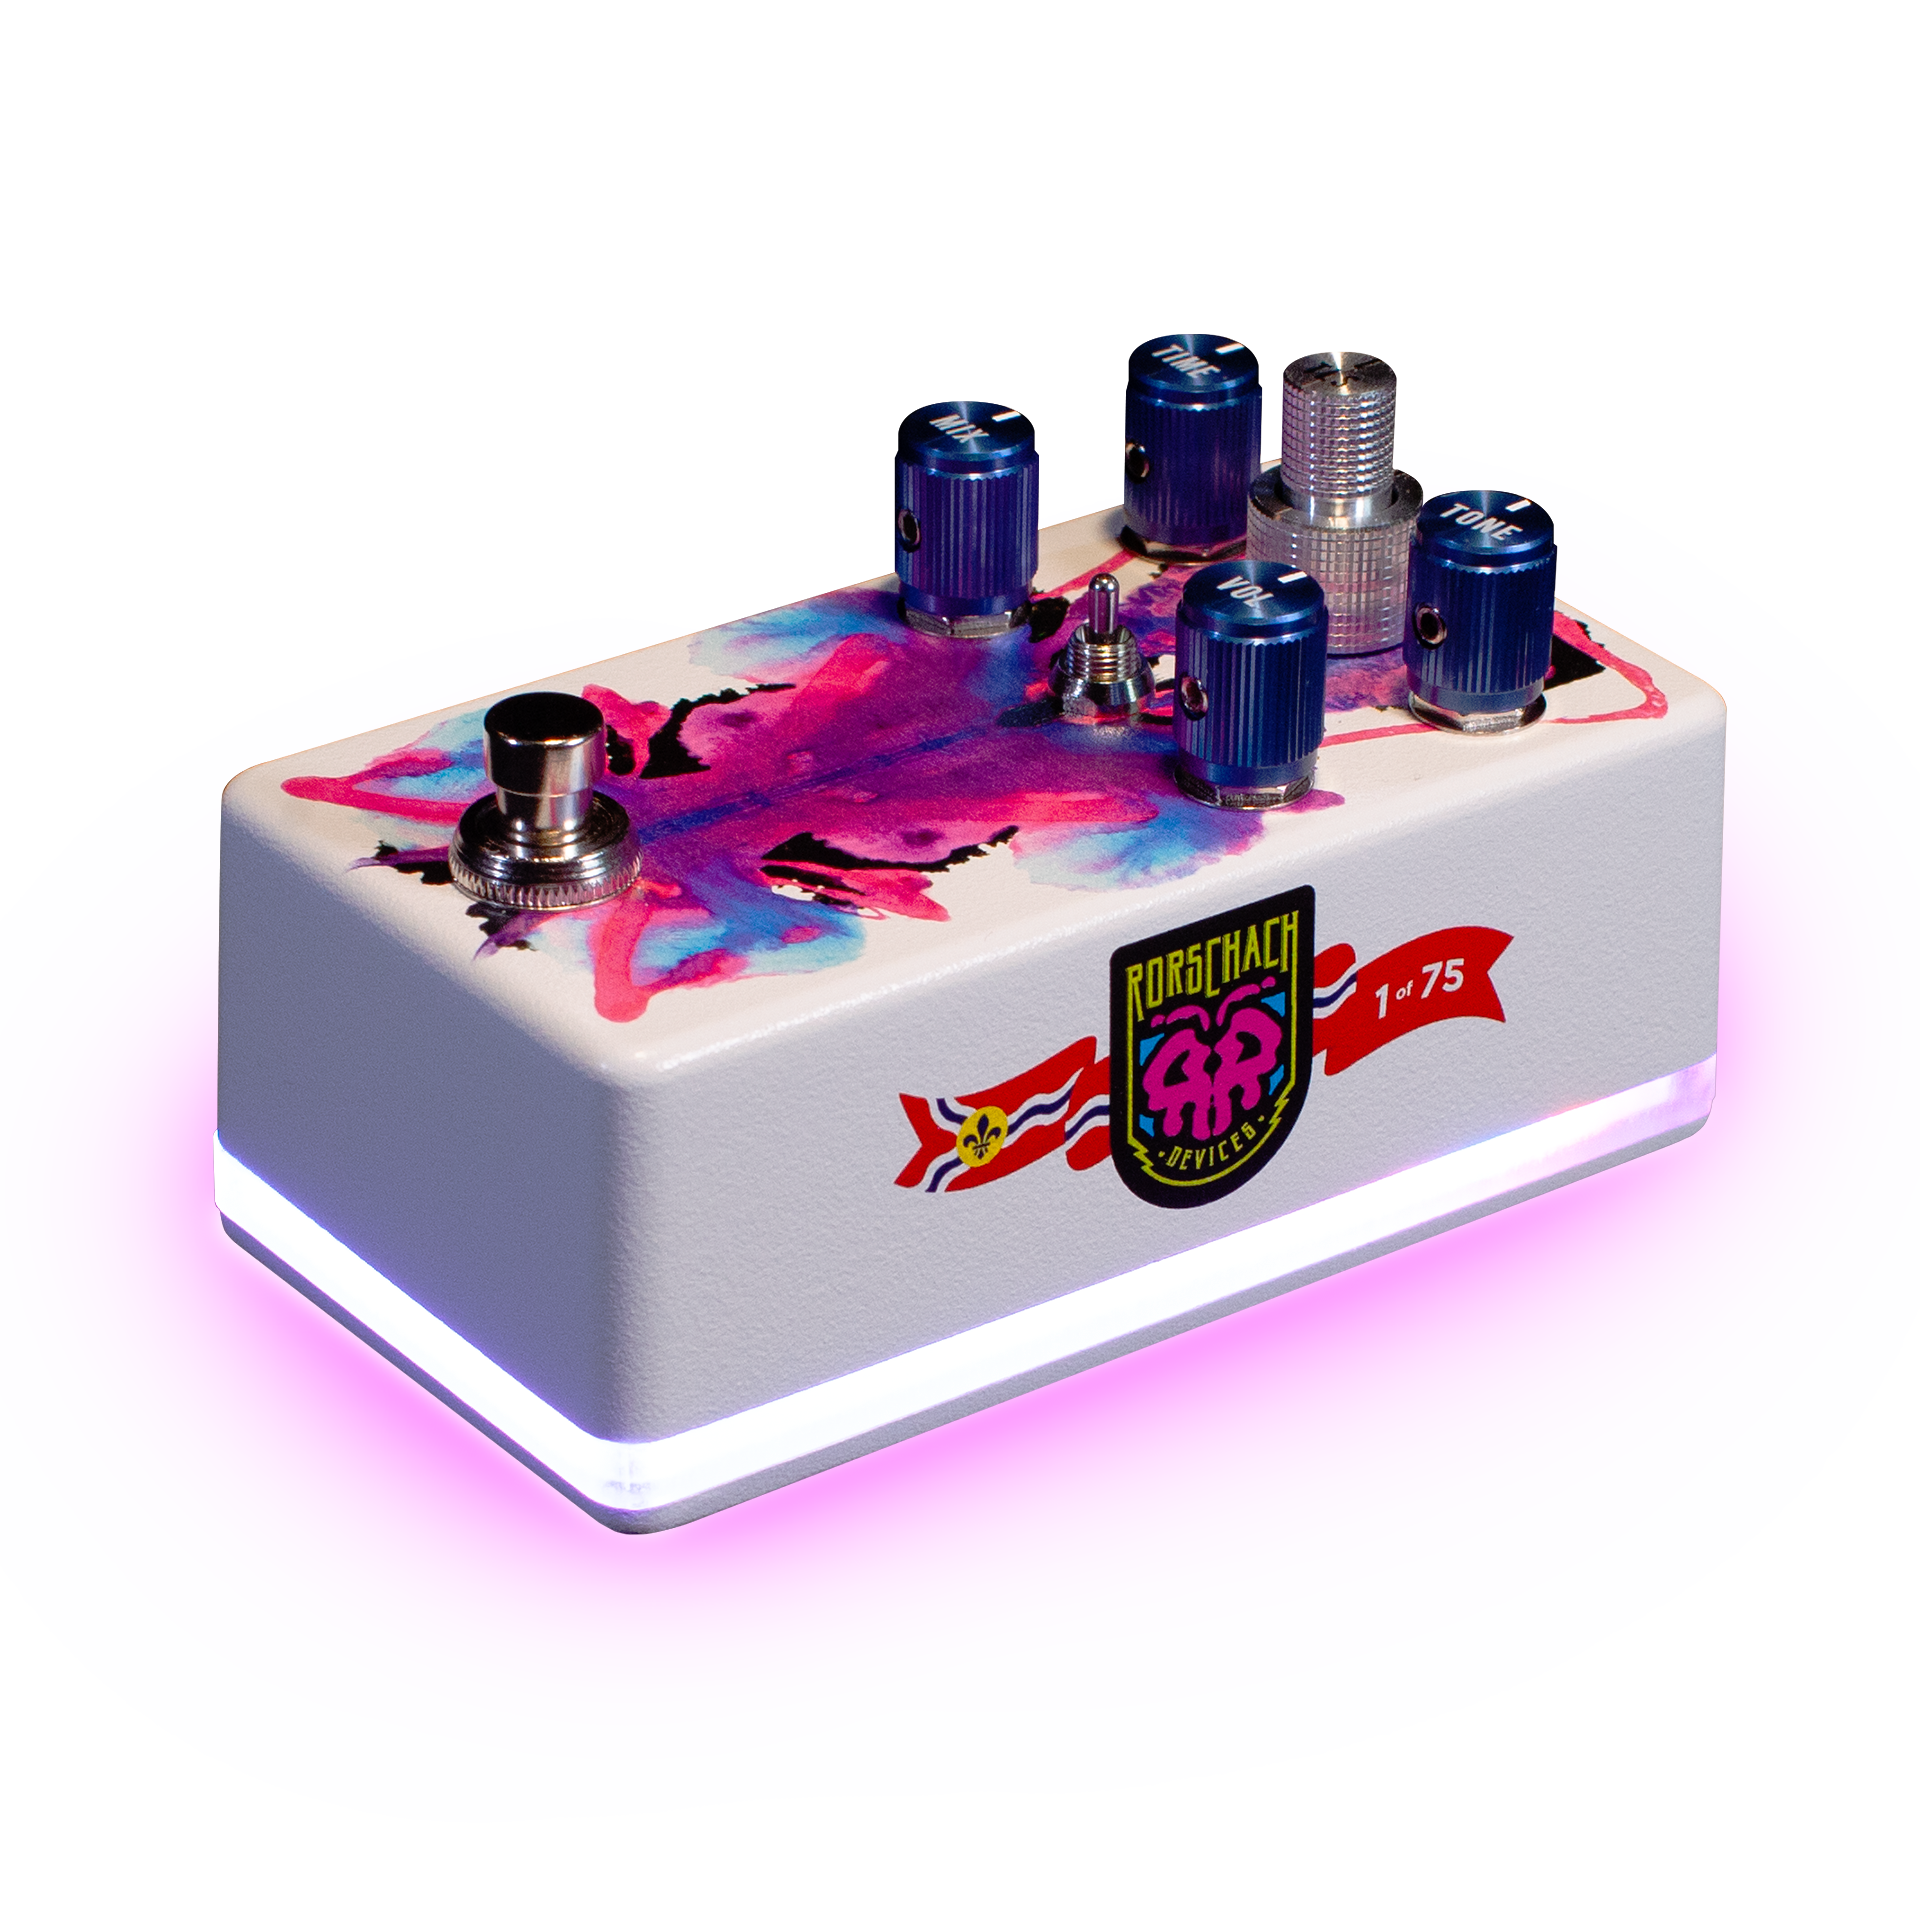 apophenia delay pedal - side view with outer pink glow